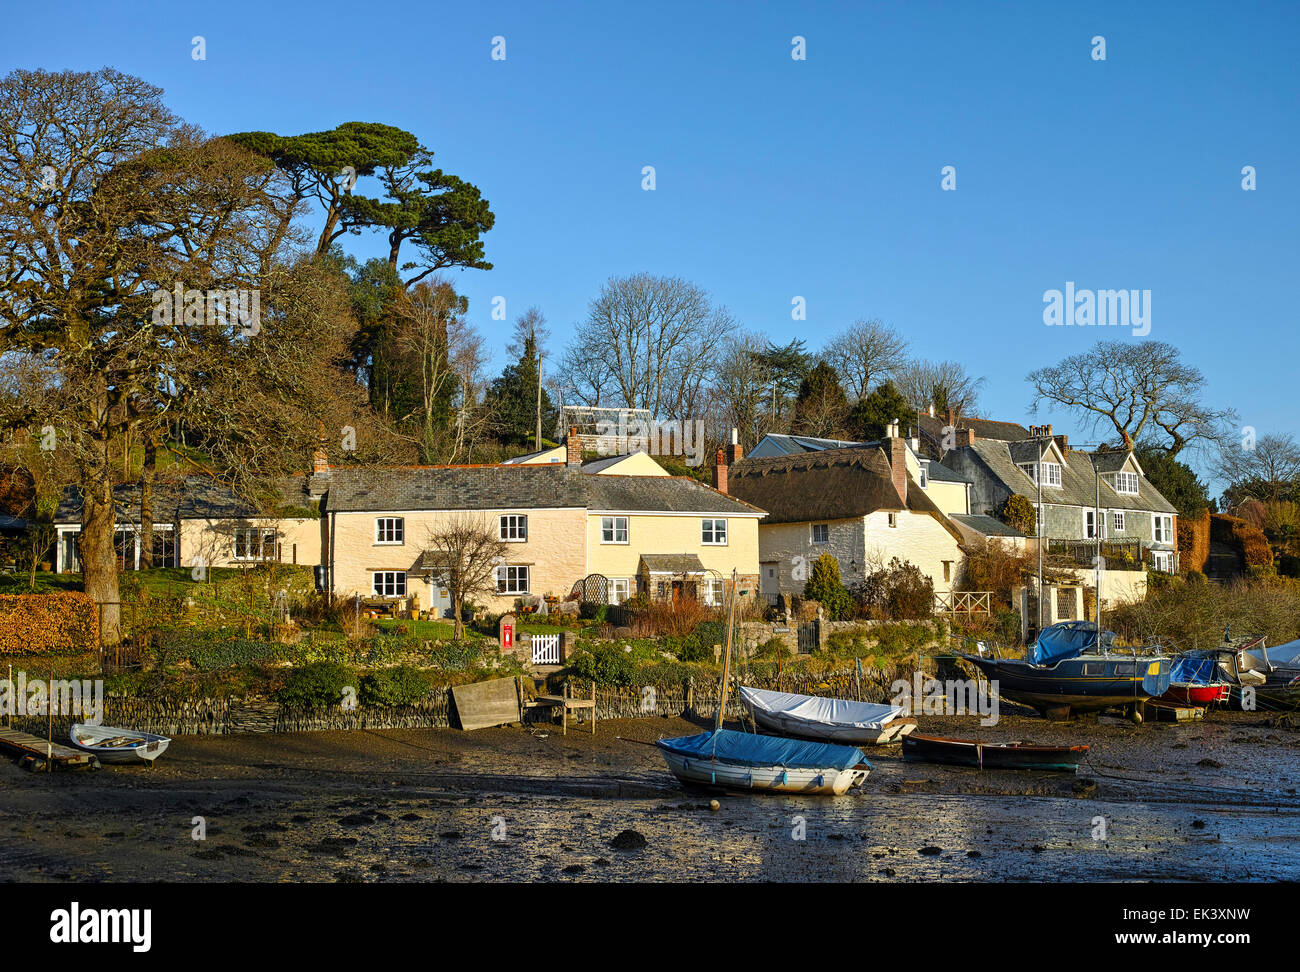 The hamlet of St.Clement on the the Tresillian river near Truro in Cornwall, UK Stock Photo